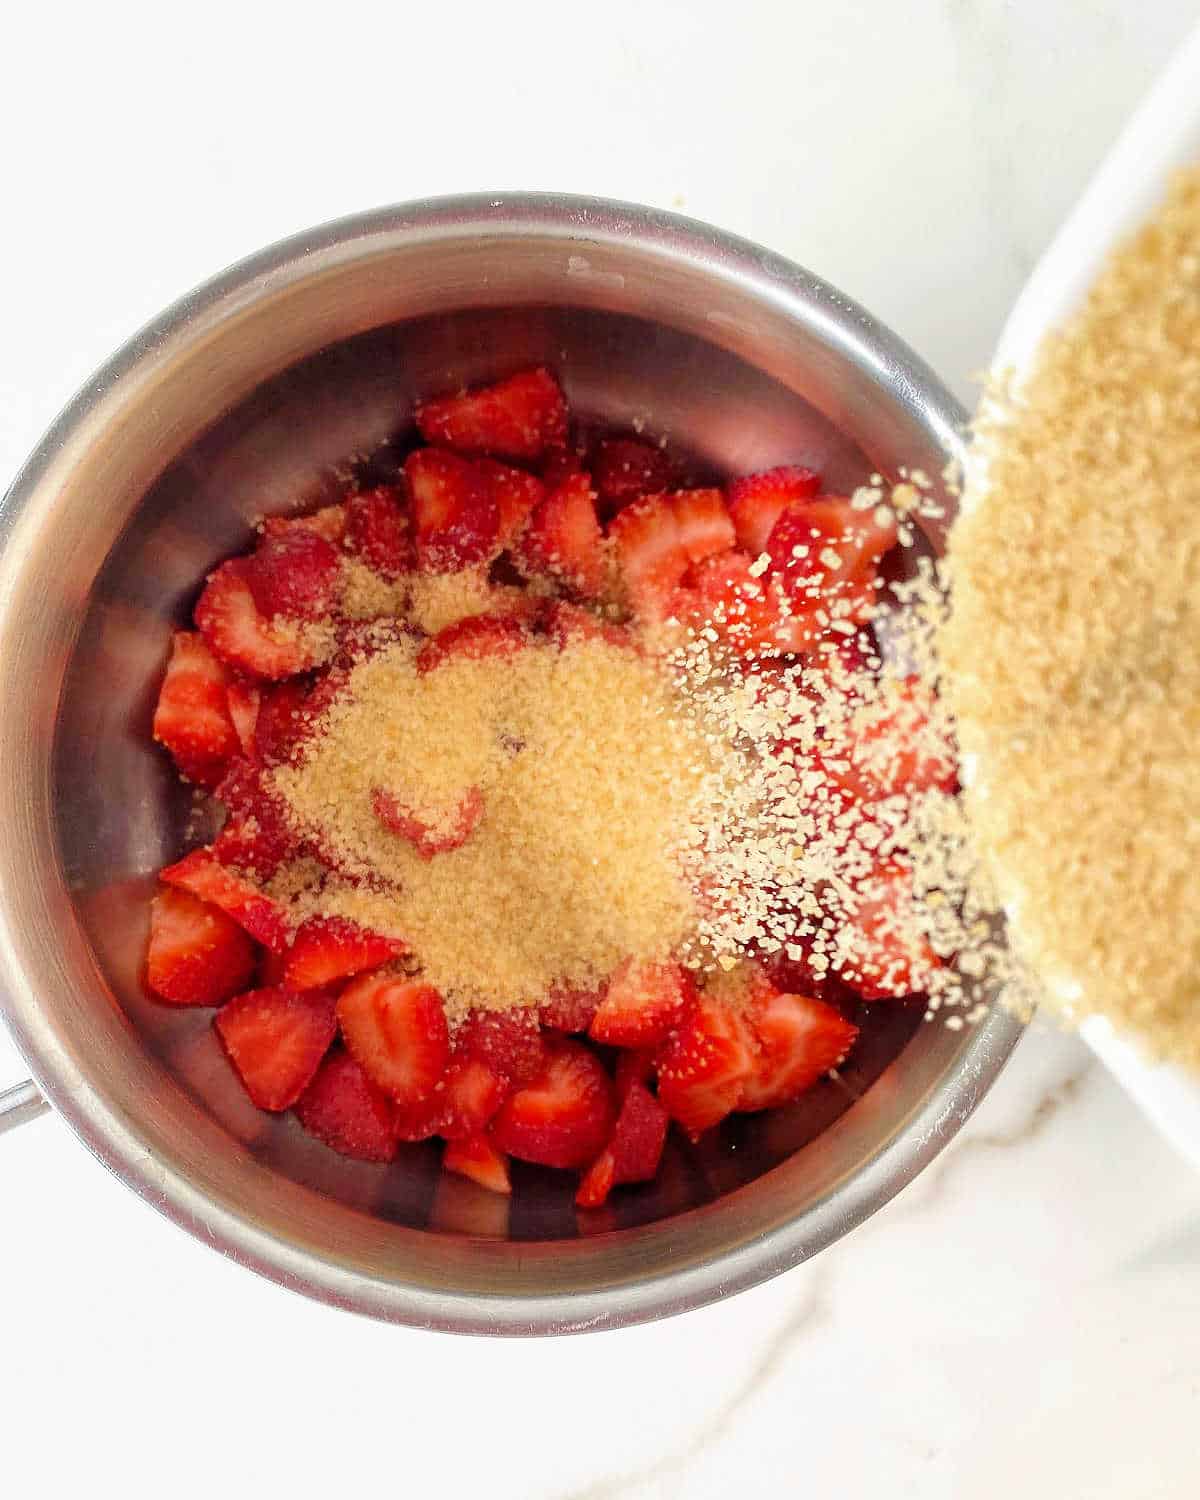 Adding brown sugar to metal saucepan with strawberry pieces. White surface.